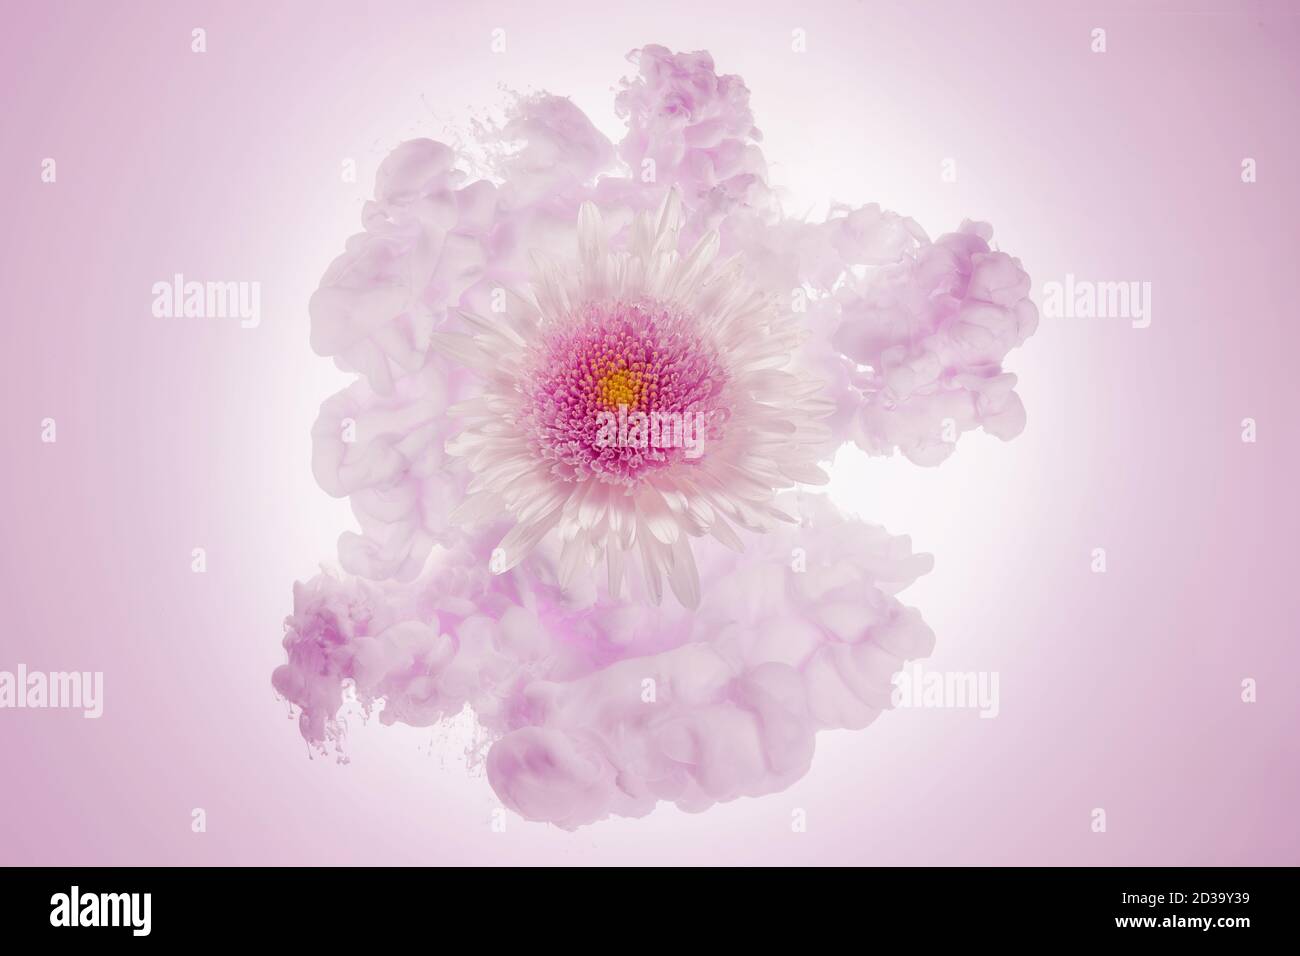 white and pink flower in a pale pink cloud Stock Photo